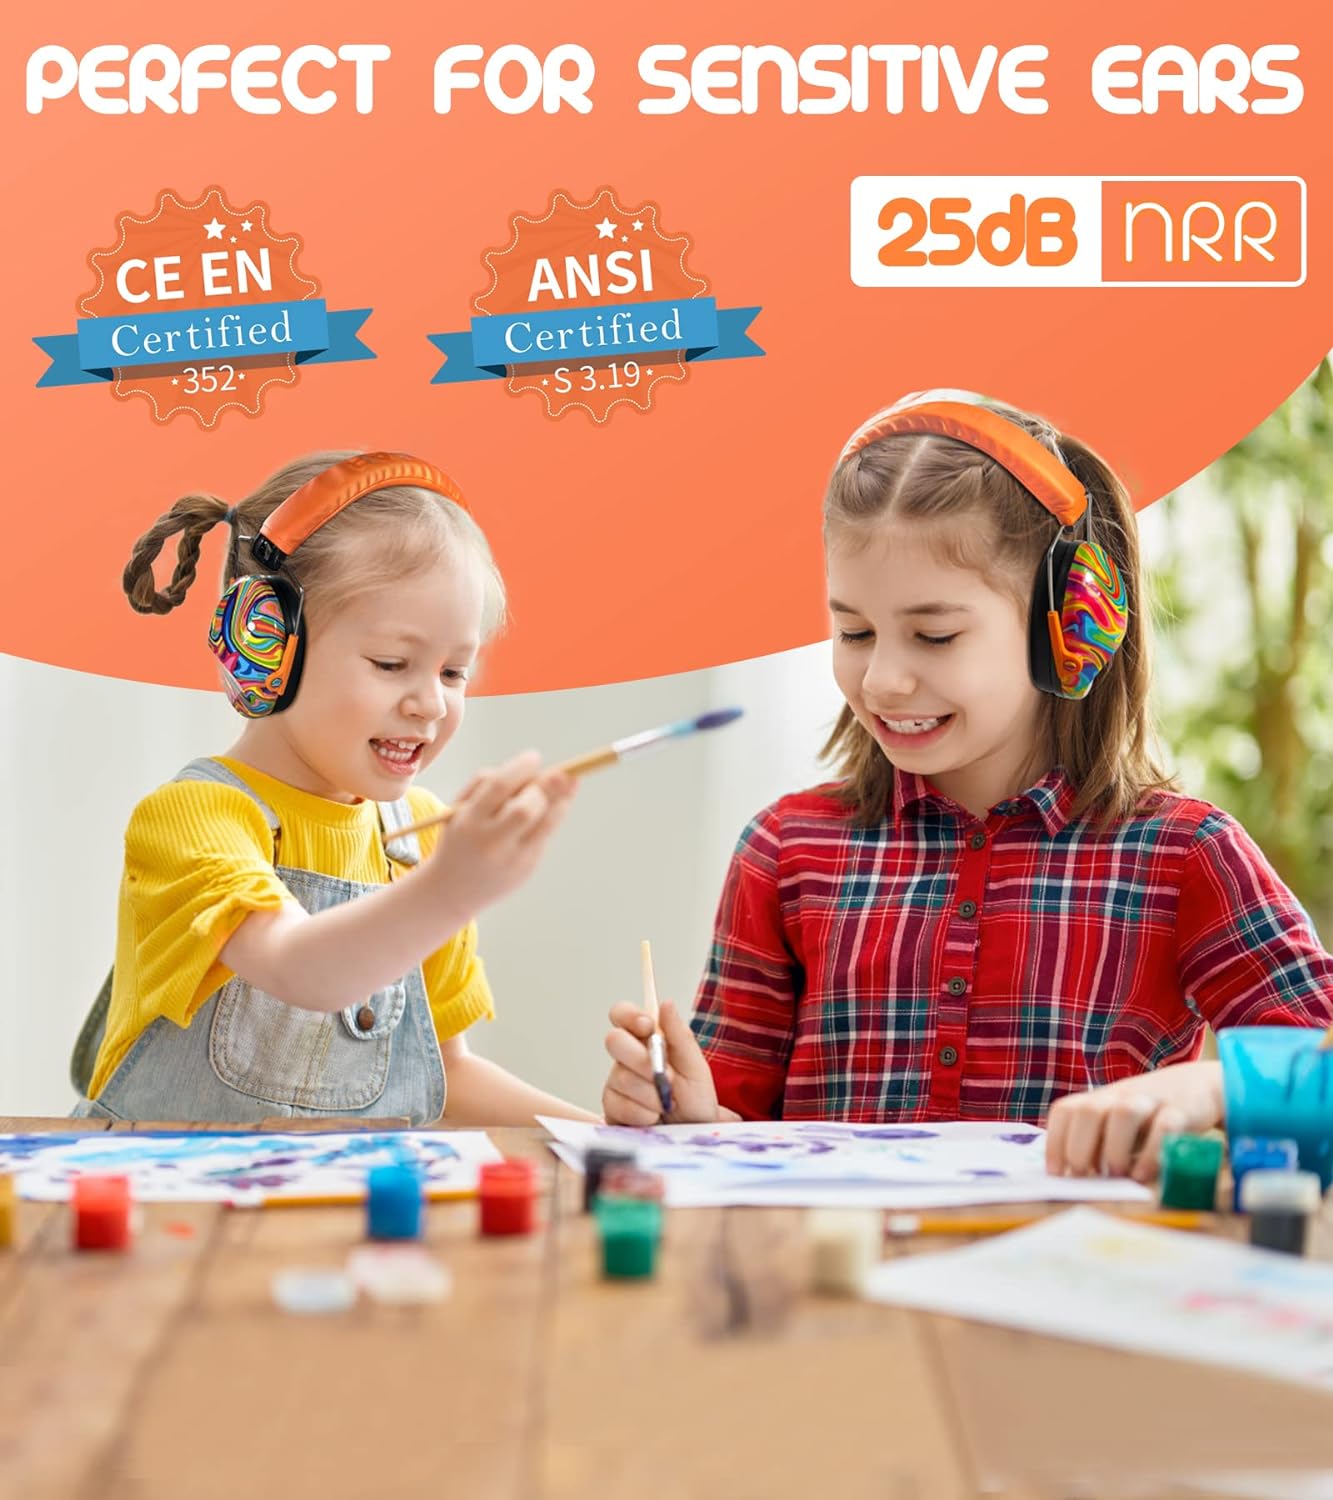 PROHEAR 032 2 Pack Kids Ear Protection, NRR 25dB, Adjustable Headband Safety Earmuffs for Sports Events, Concerts, Airports